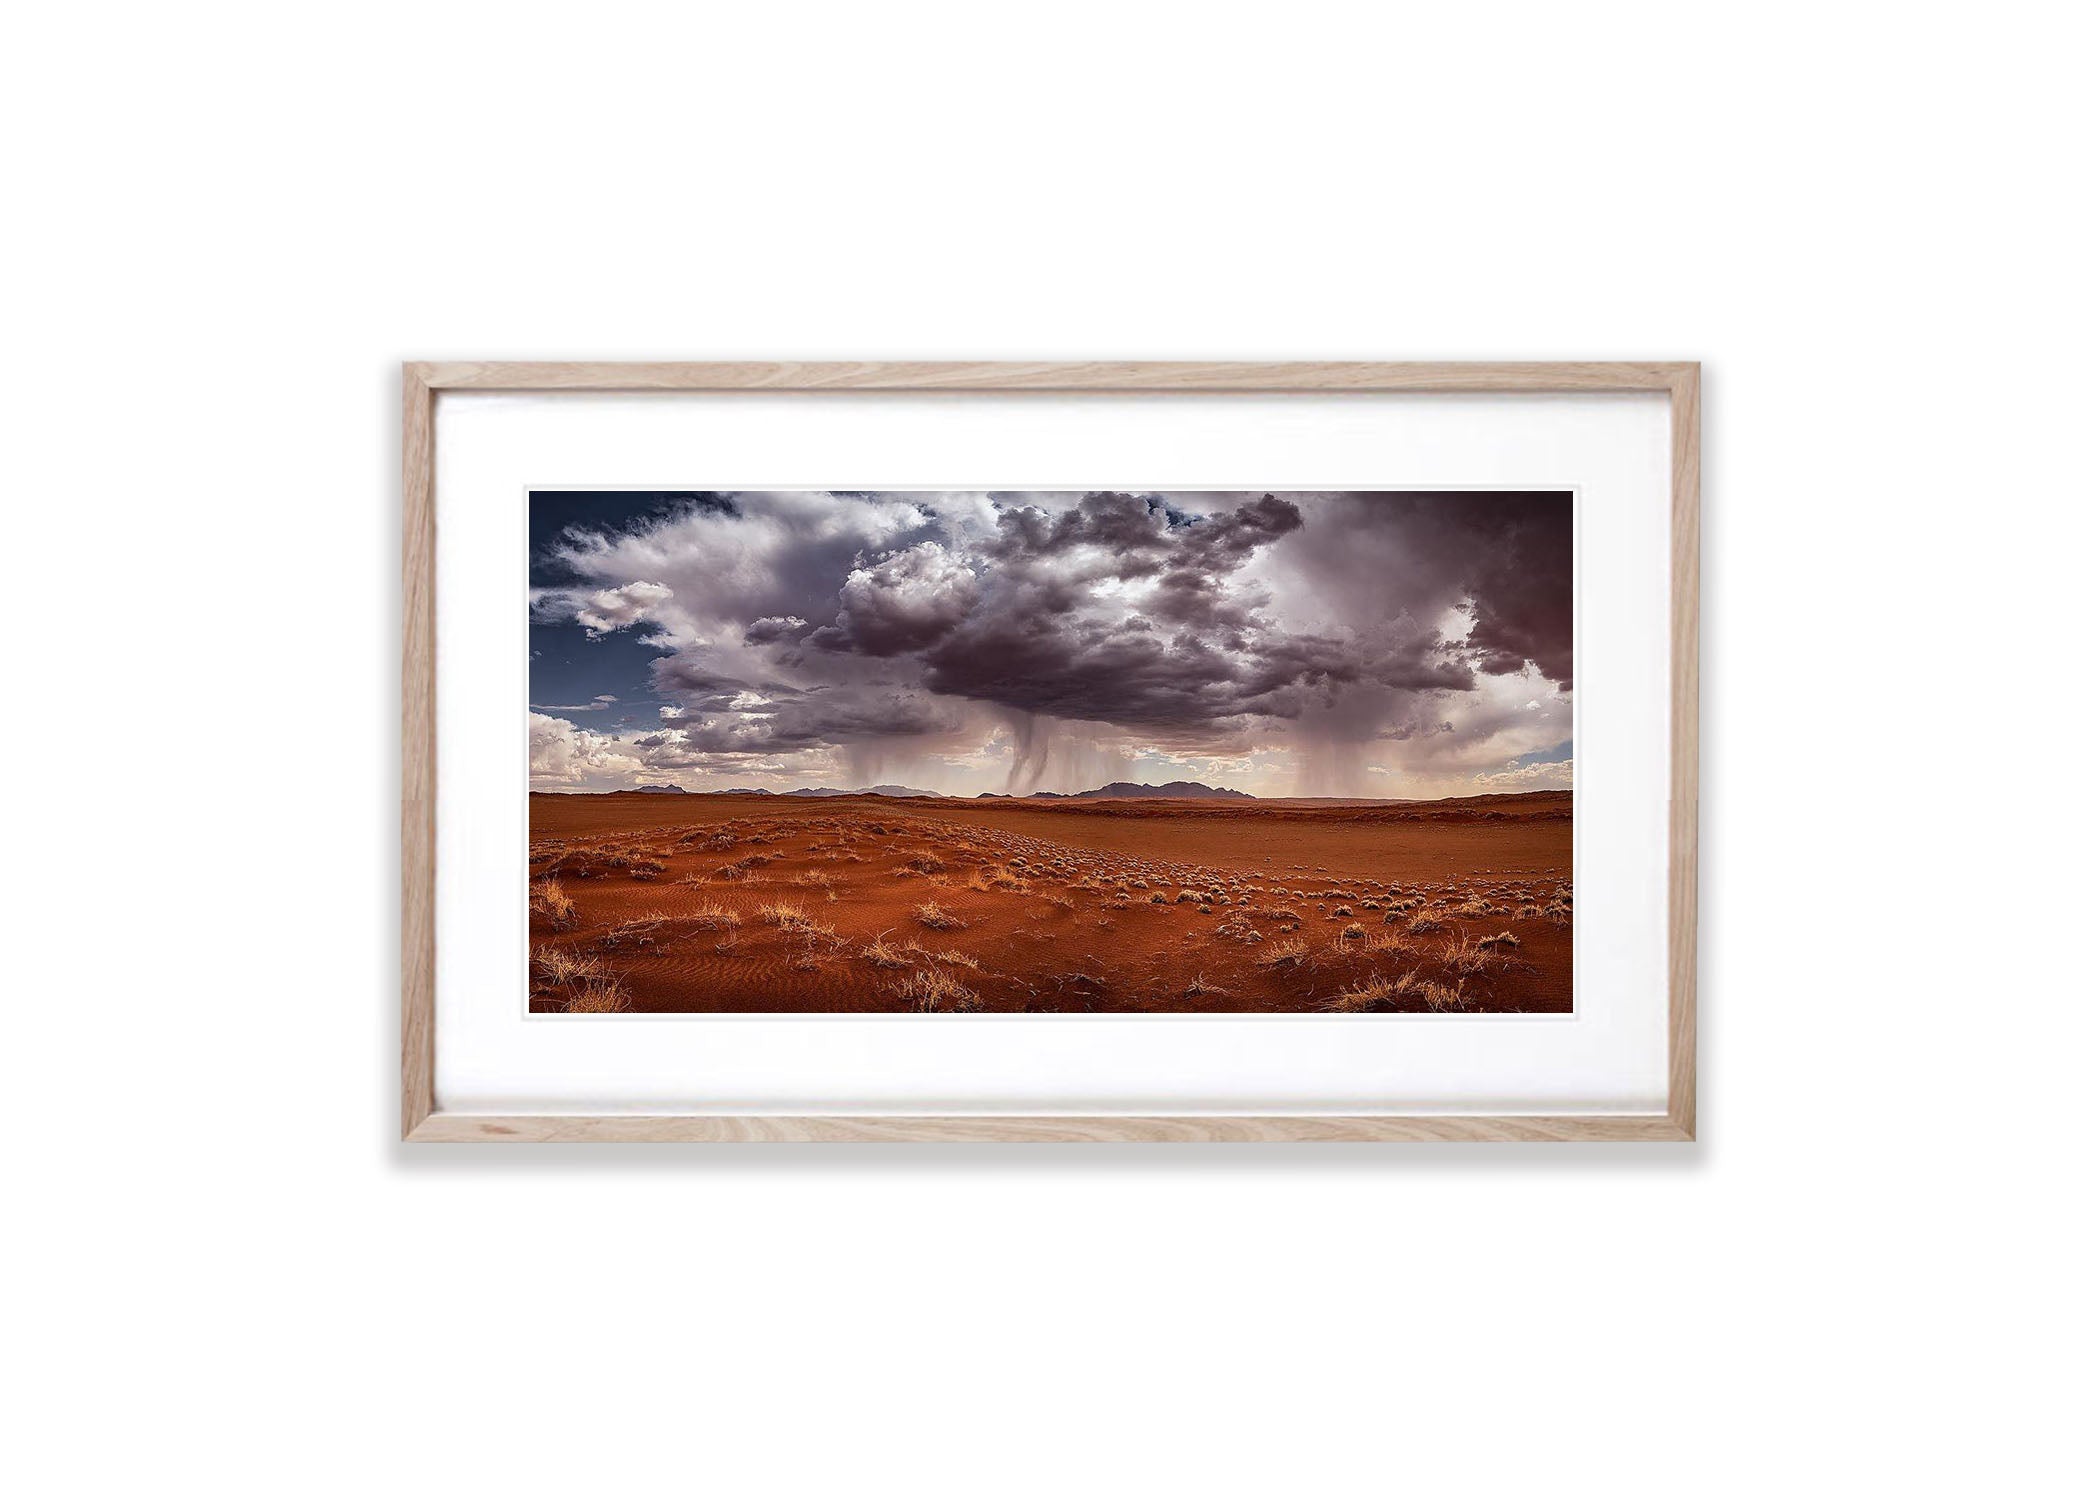 Afternoon Storm - Wolwedans, Namibia